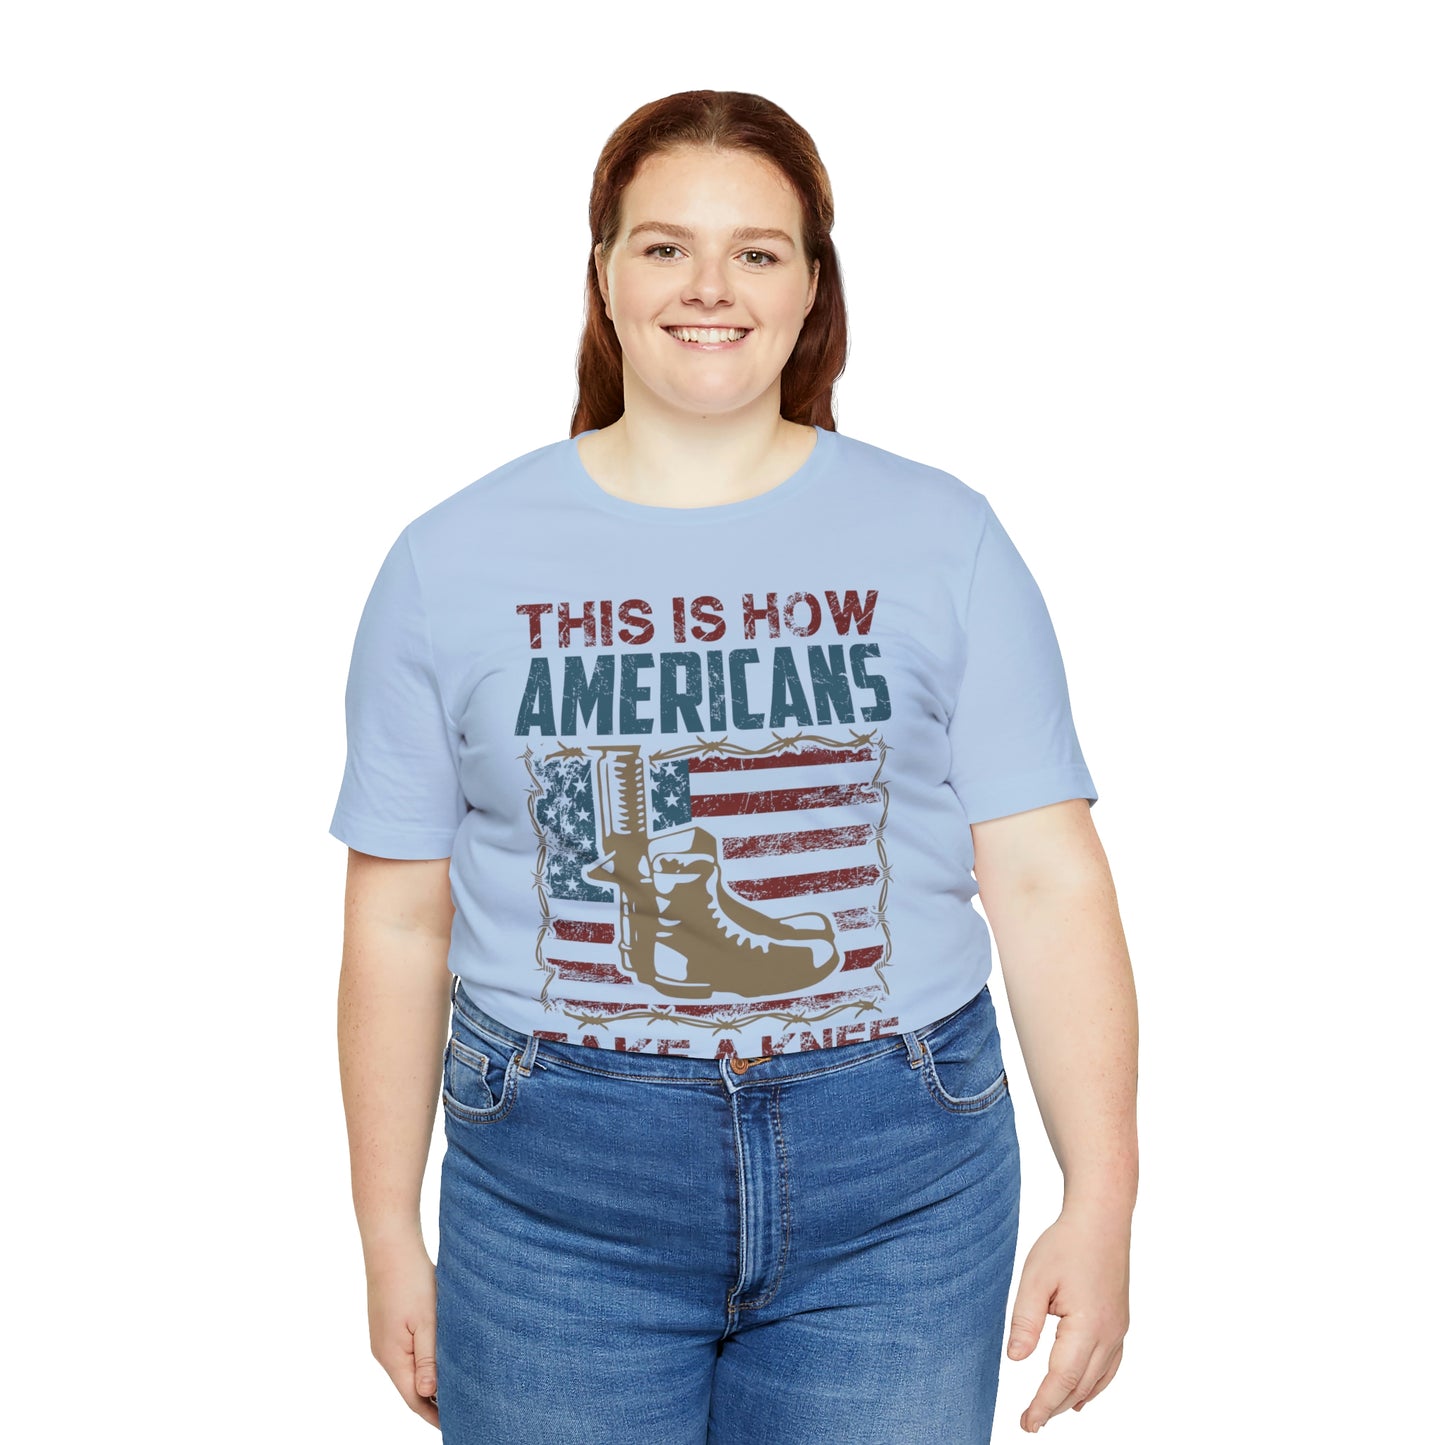 This is How Americans Take a Knee Short Sleeve T-shirt